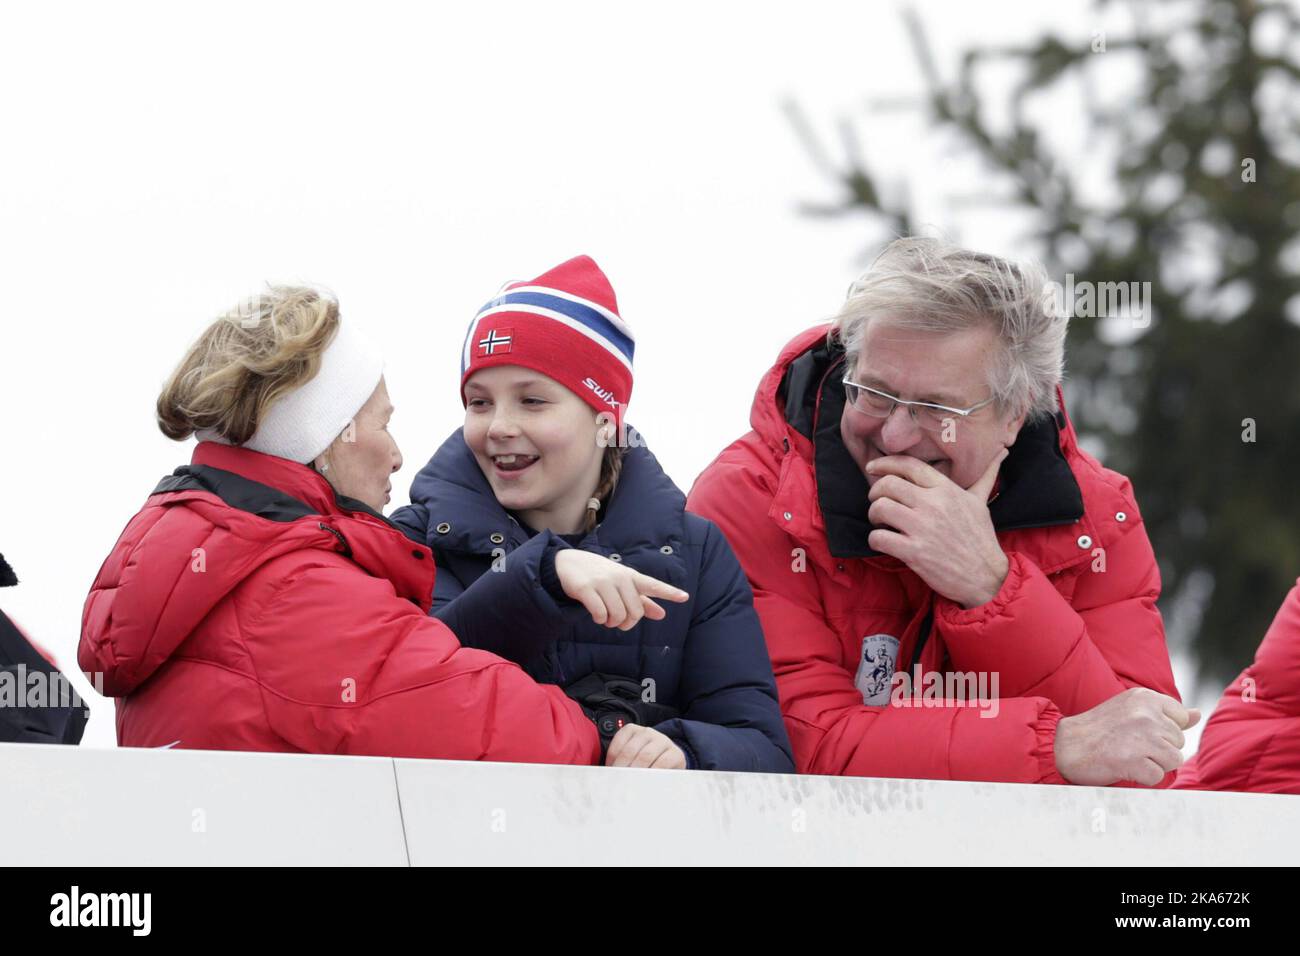 The Norwegian Royal Family visits Holmenkollen at Ski World Cup, watching ski jump. From left: Queen Sonja, Princess Ingrid Alexandra  and Fabian Stang, mayor of Oslo.   Stock Photo